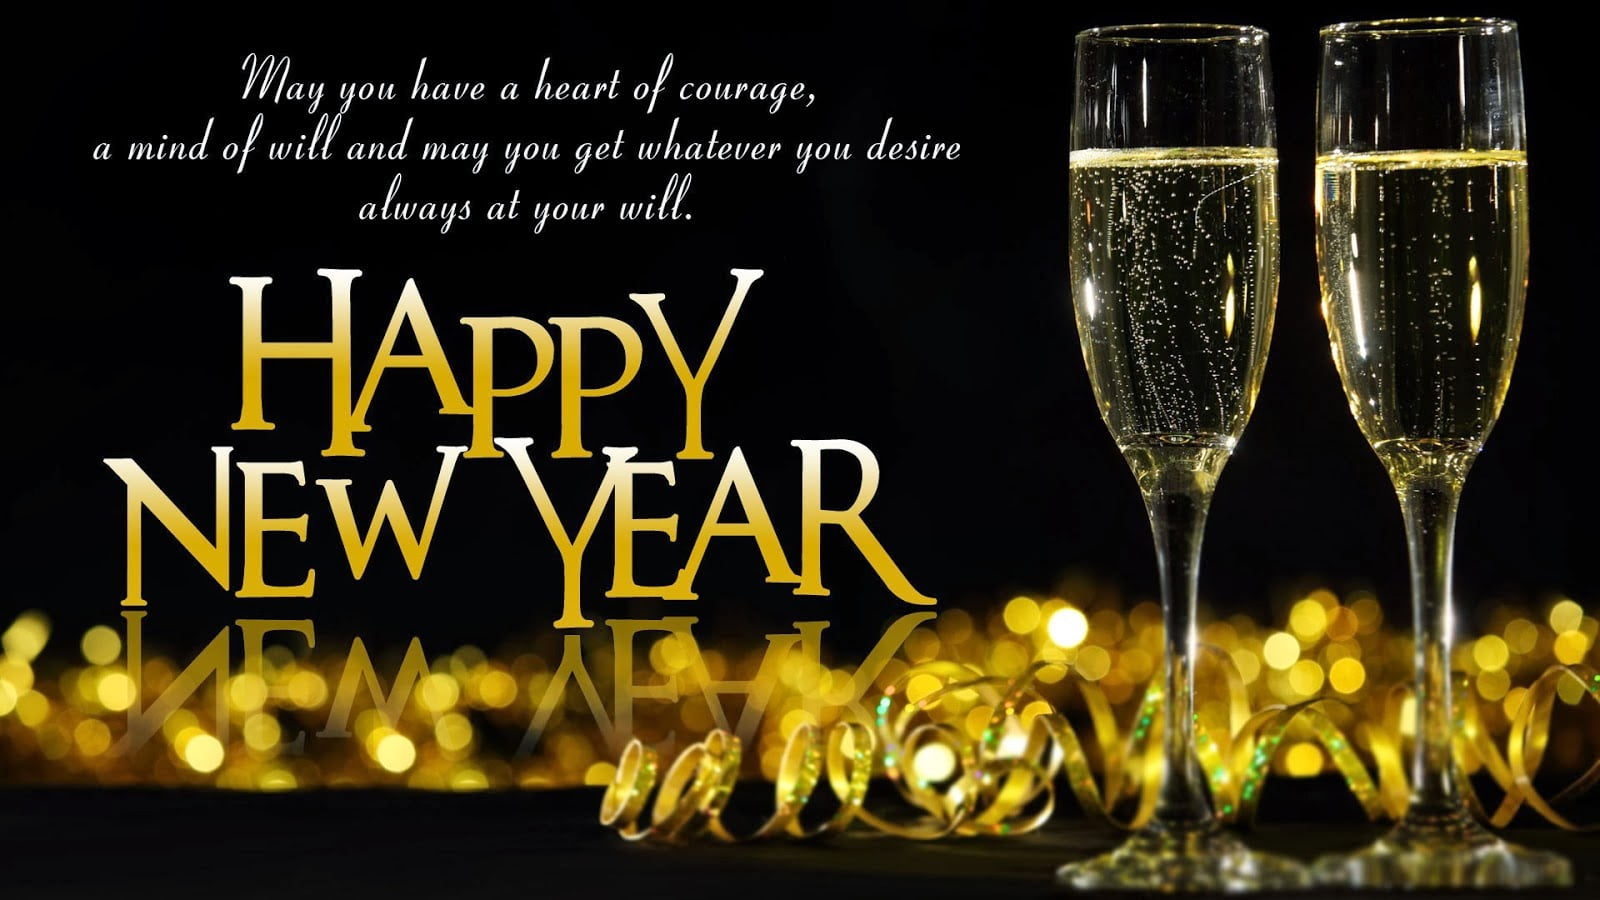 Advance Happy New Year 2018 Sms Whatsapp Status DP Quotes Msg Wishes Images